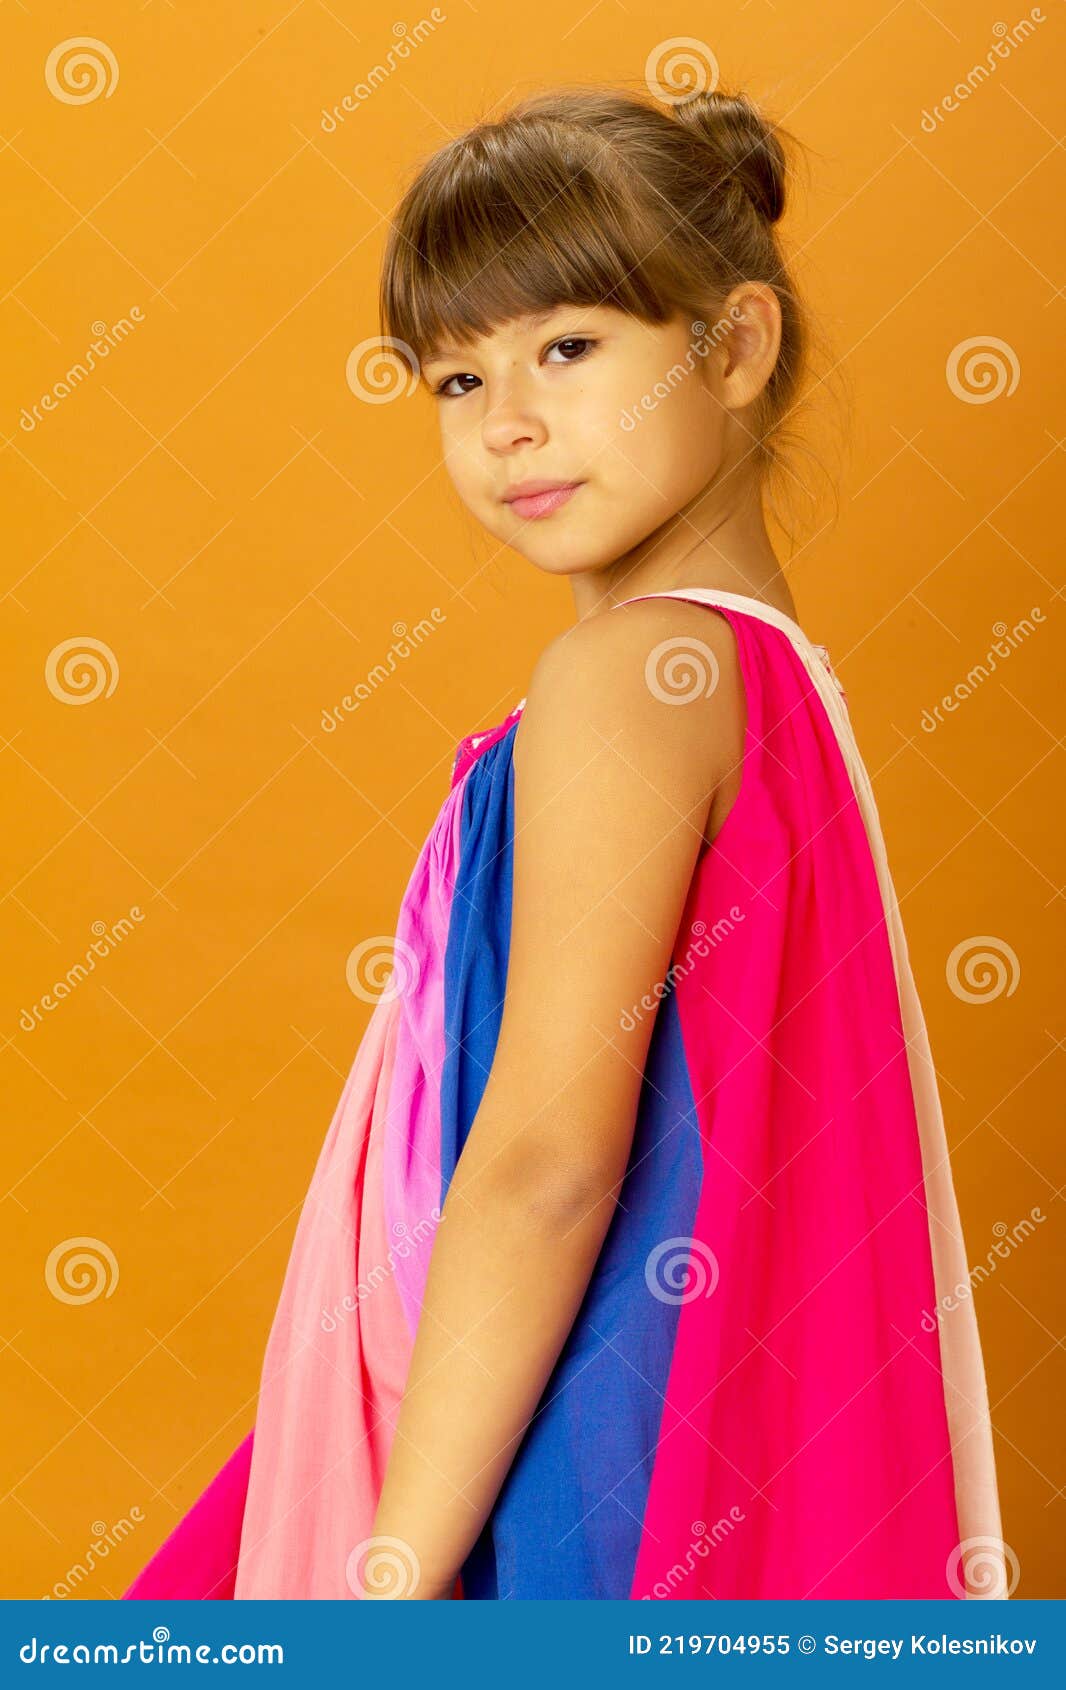 Close Up Shot of Pretty Preteen Girl Stock Image - Image of girl ...